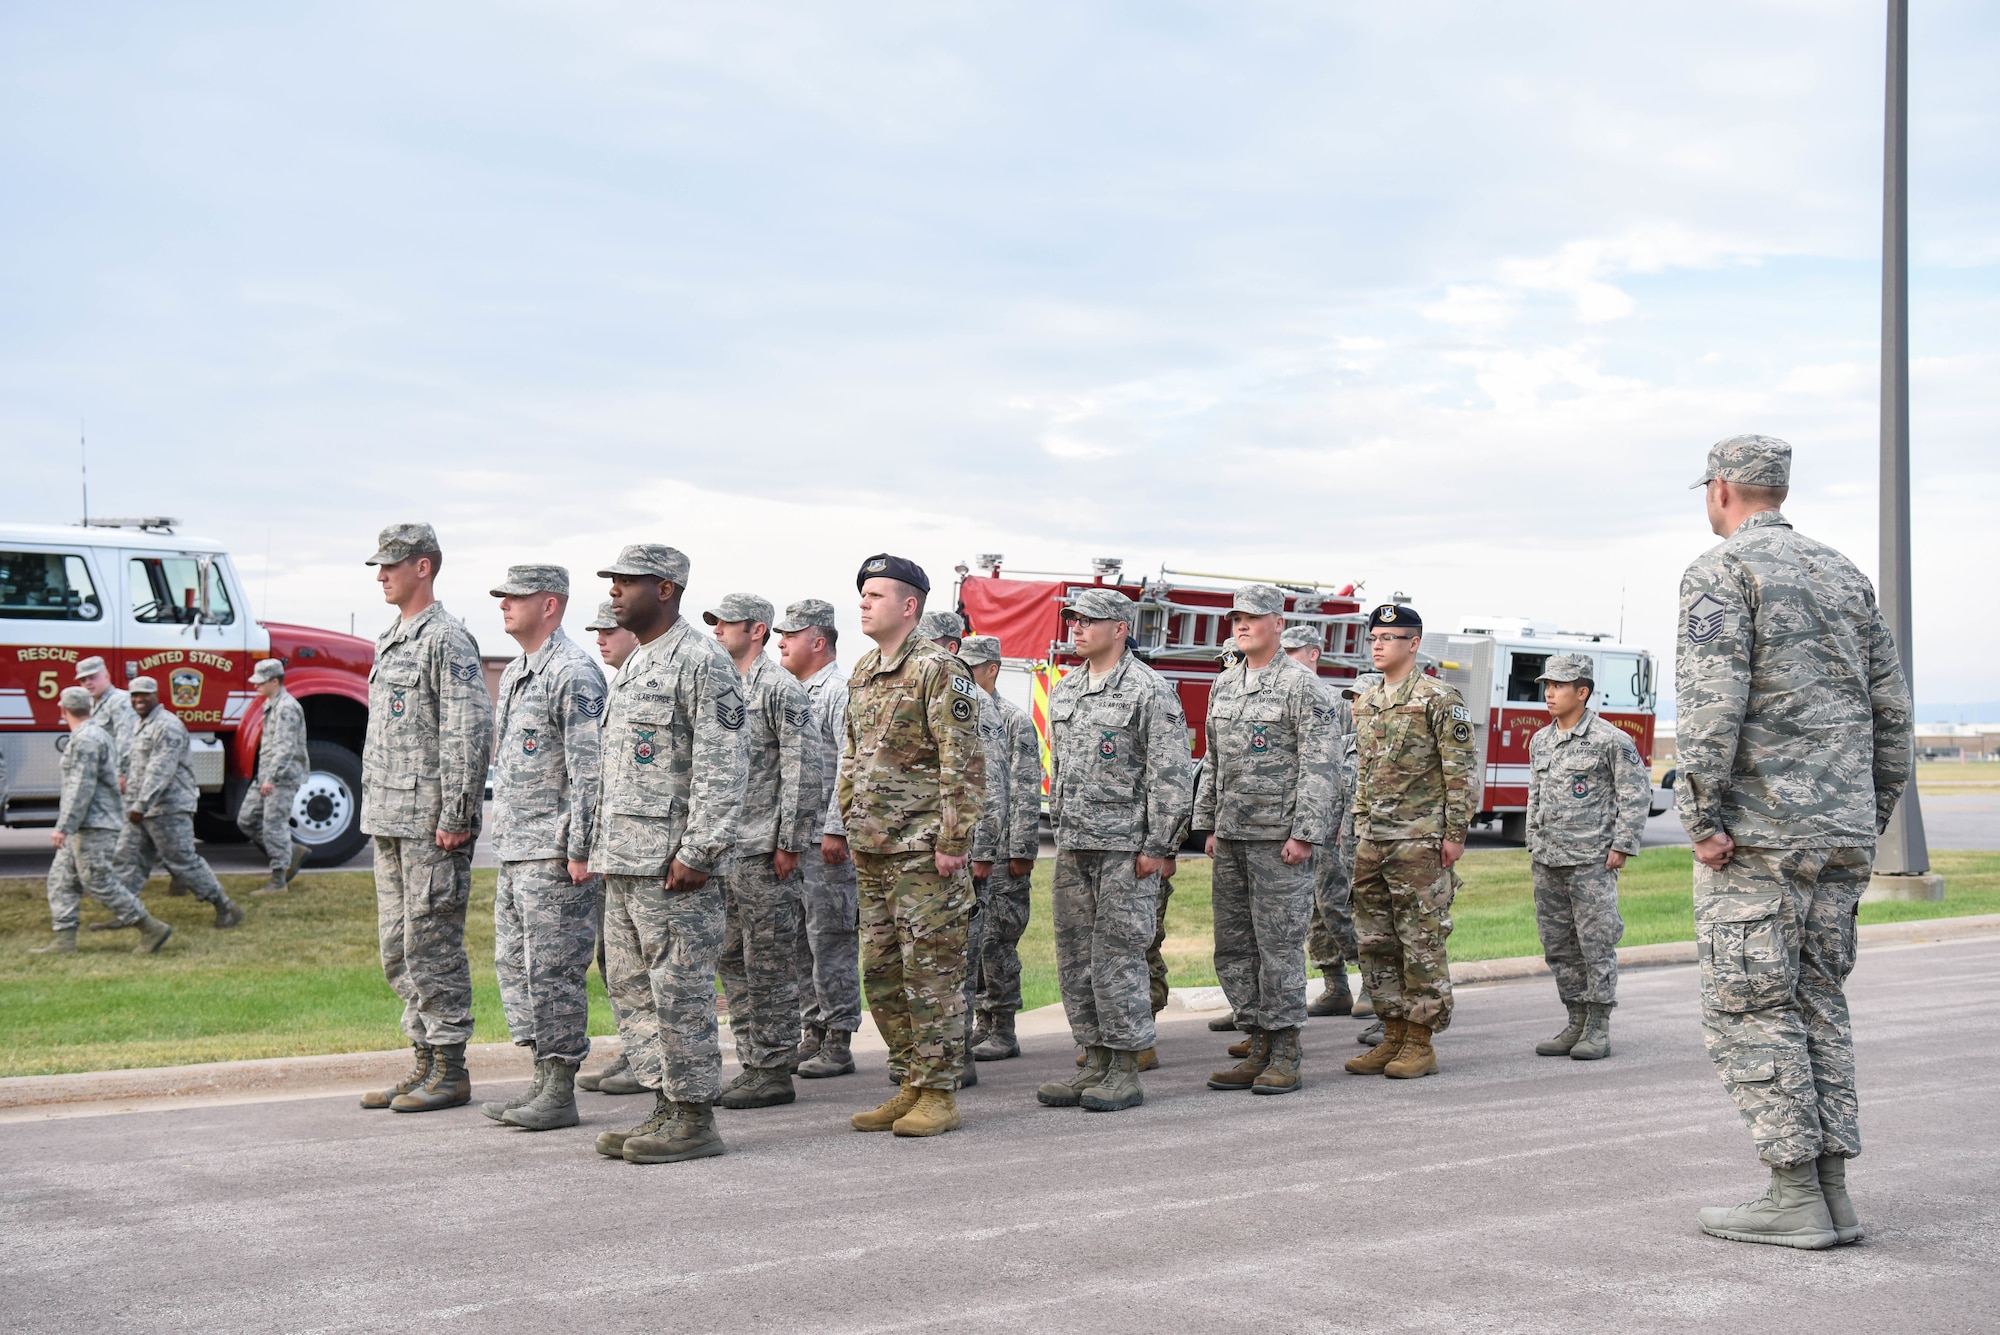 Members of the 28th Civil Engineer Squadron fire department, emergency medical services and the 28th Security Forces Squadron form up at the 9/11 memorial ceremony outside of the 28th Bomb Wing headquarters at Ellsworth Air Force Base, S.D., Sept. 11, 2018. As a result of the 9/11 terrorist attack, 412 first responders died and countless others were injured while trying to save the lives of others. (U.S. Air Force photo by Airman Christina Bennett